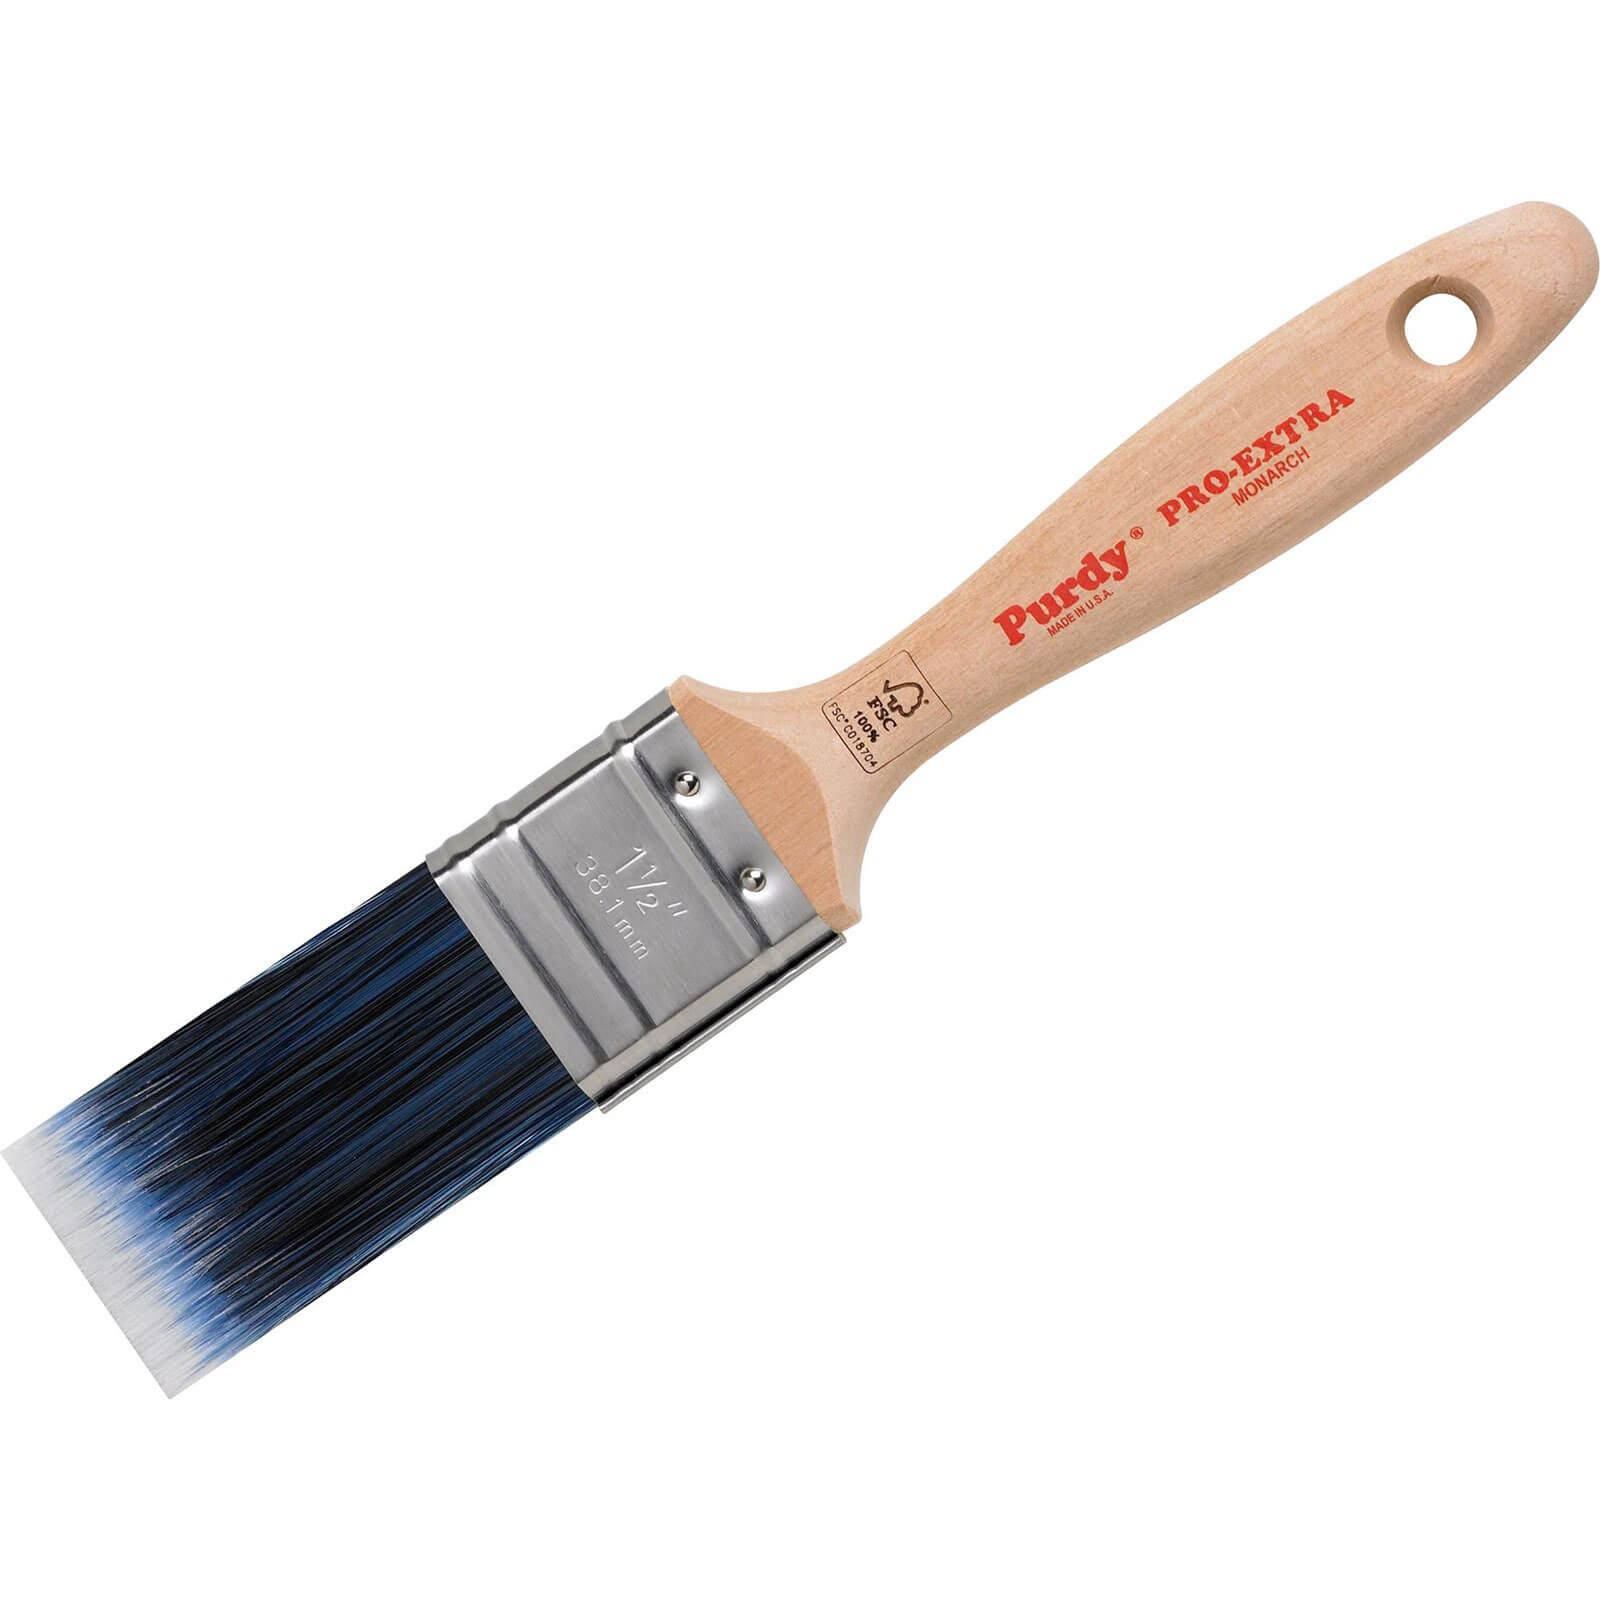 Purdy Pro Extra Monarch Paint Brush 40mm